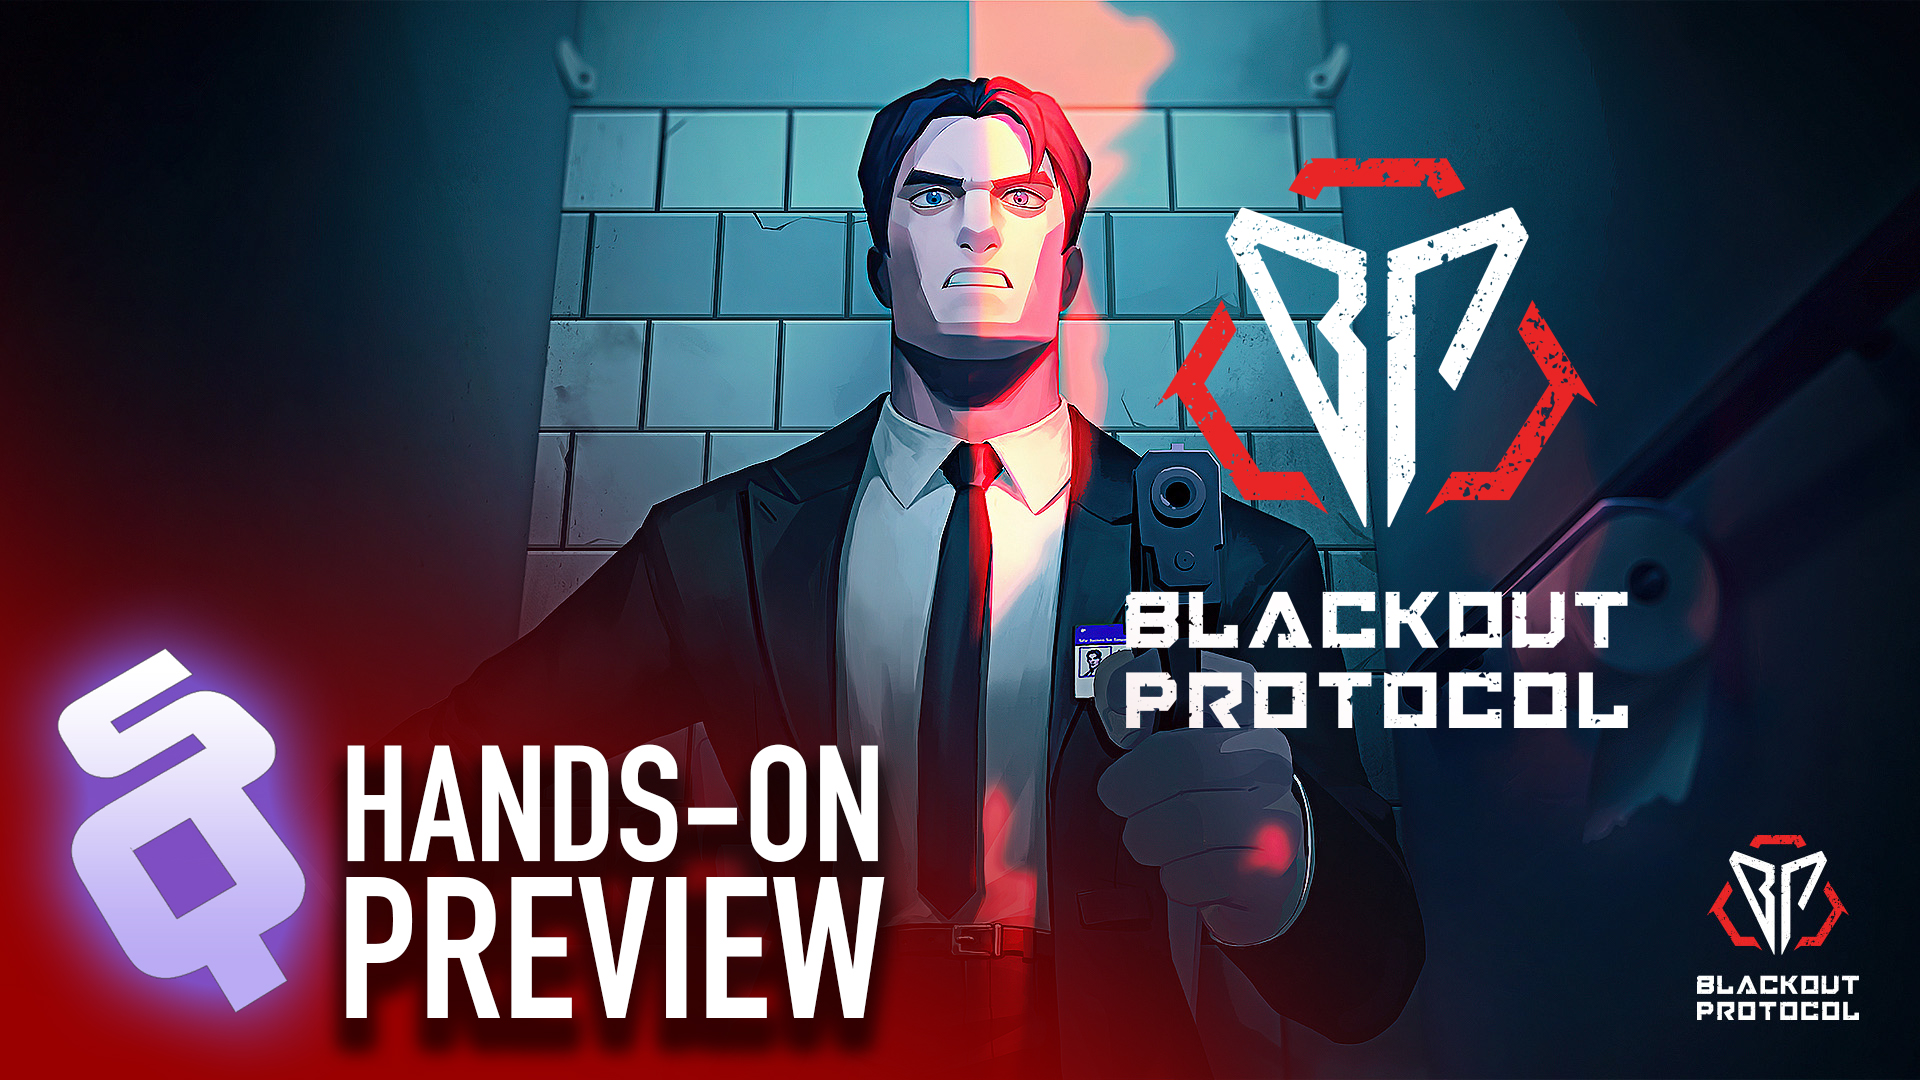 Blackout Protocol hands-on preview